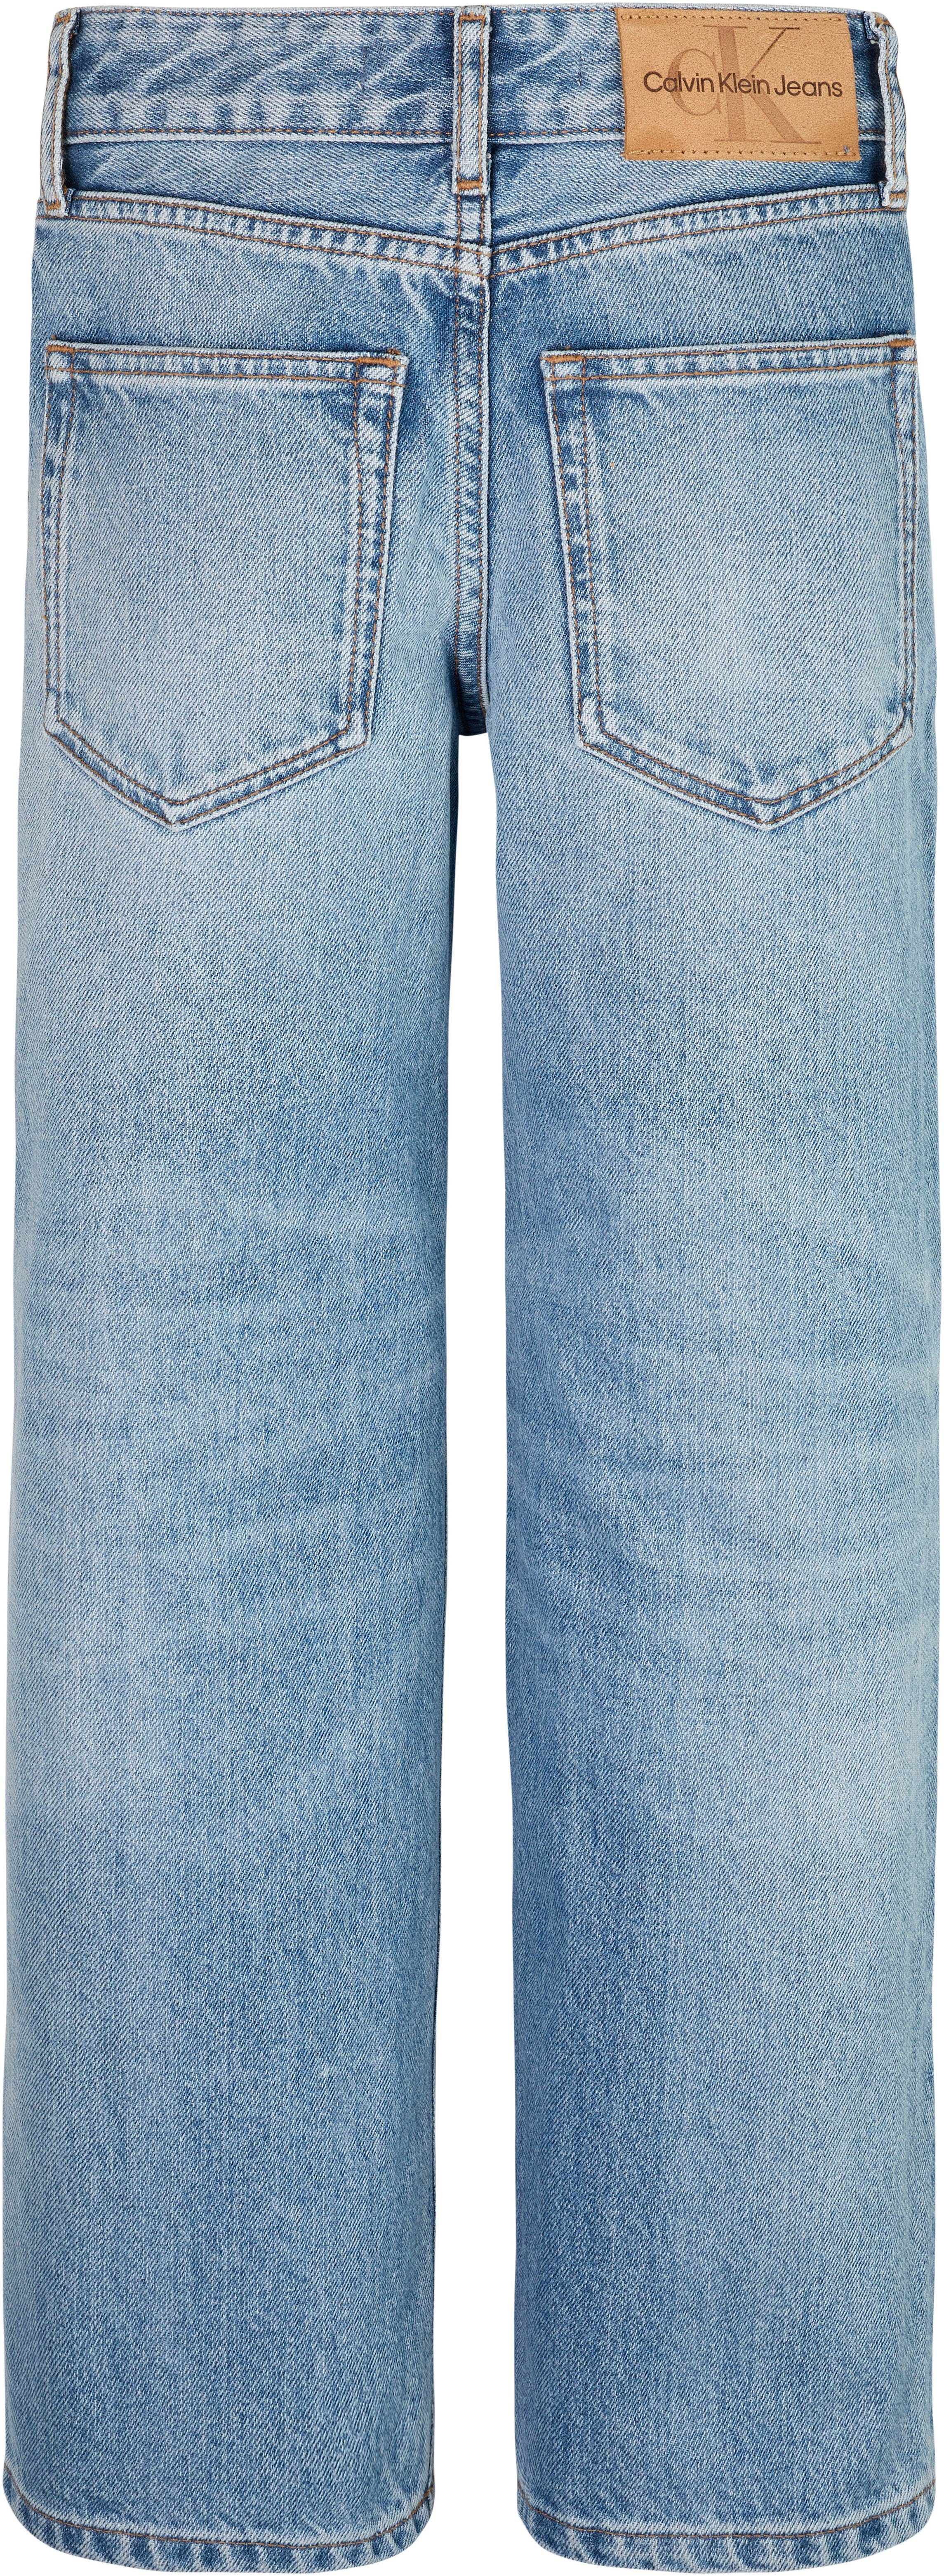 Calvin Klein Jeans BLUE LIGHT AUTH. RELAXED Stretch-Jeans SKATER